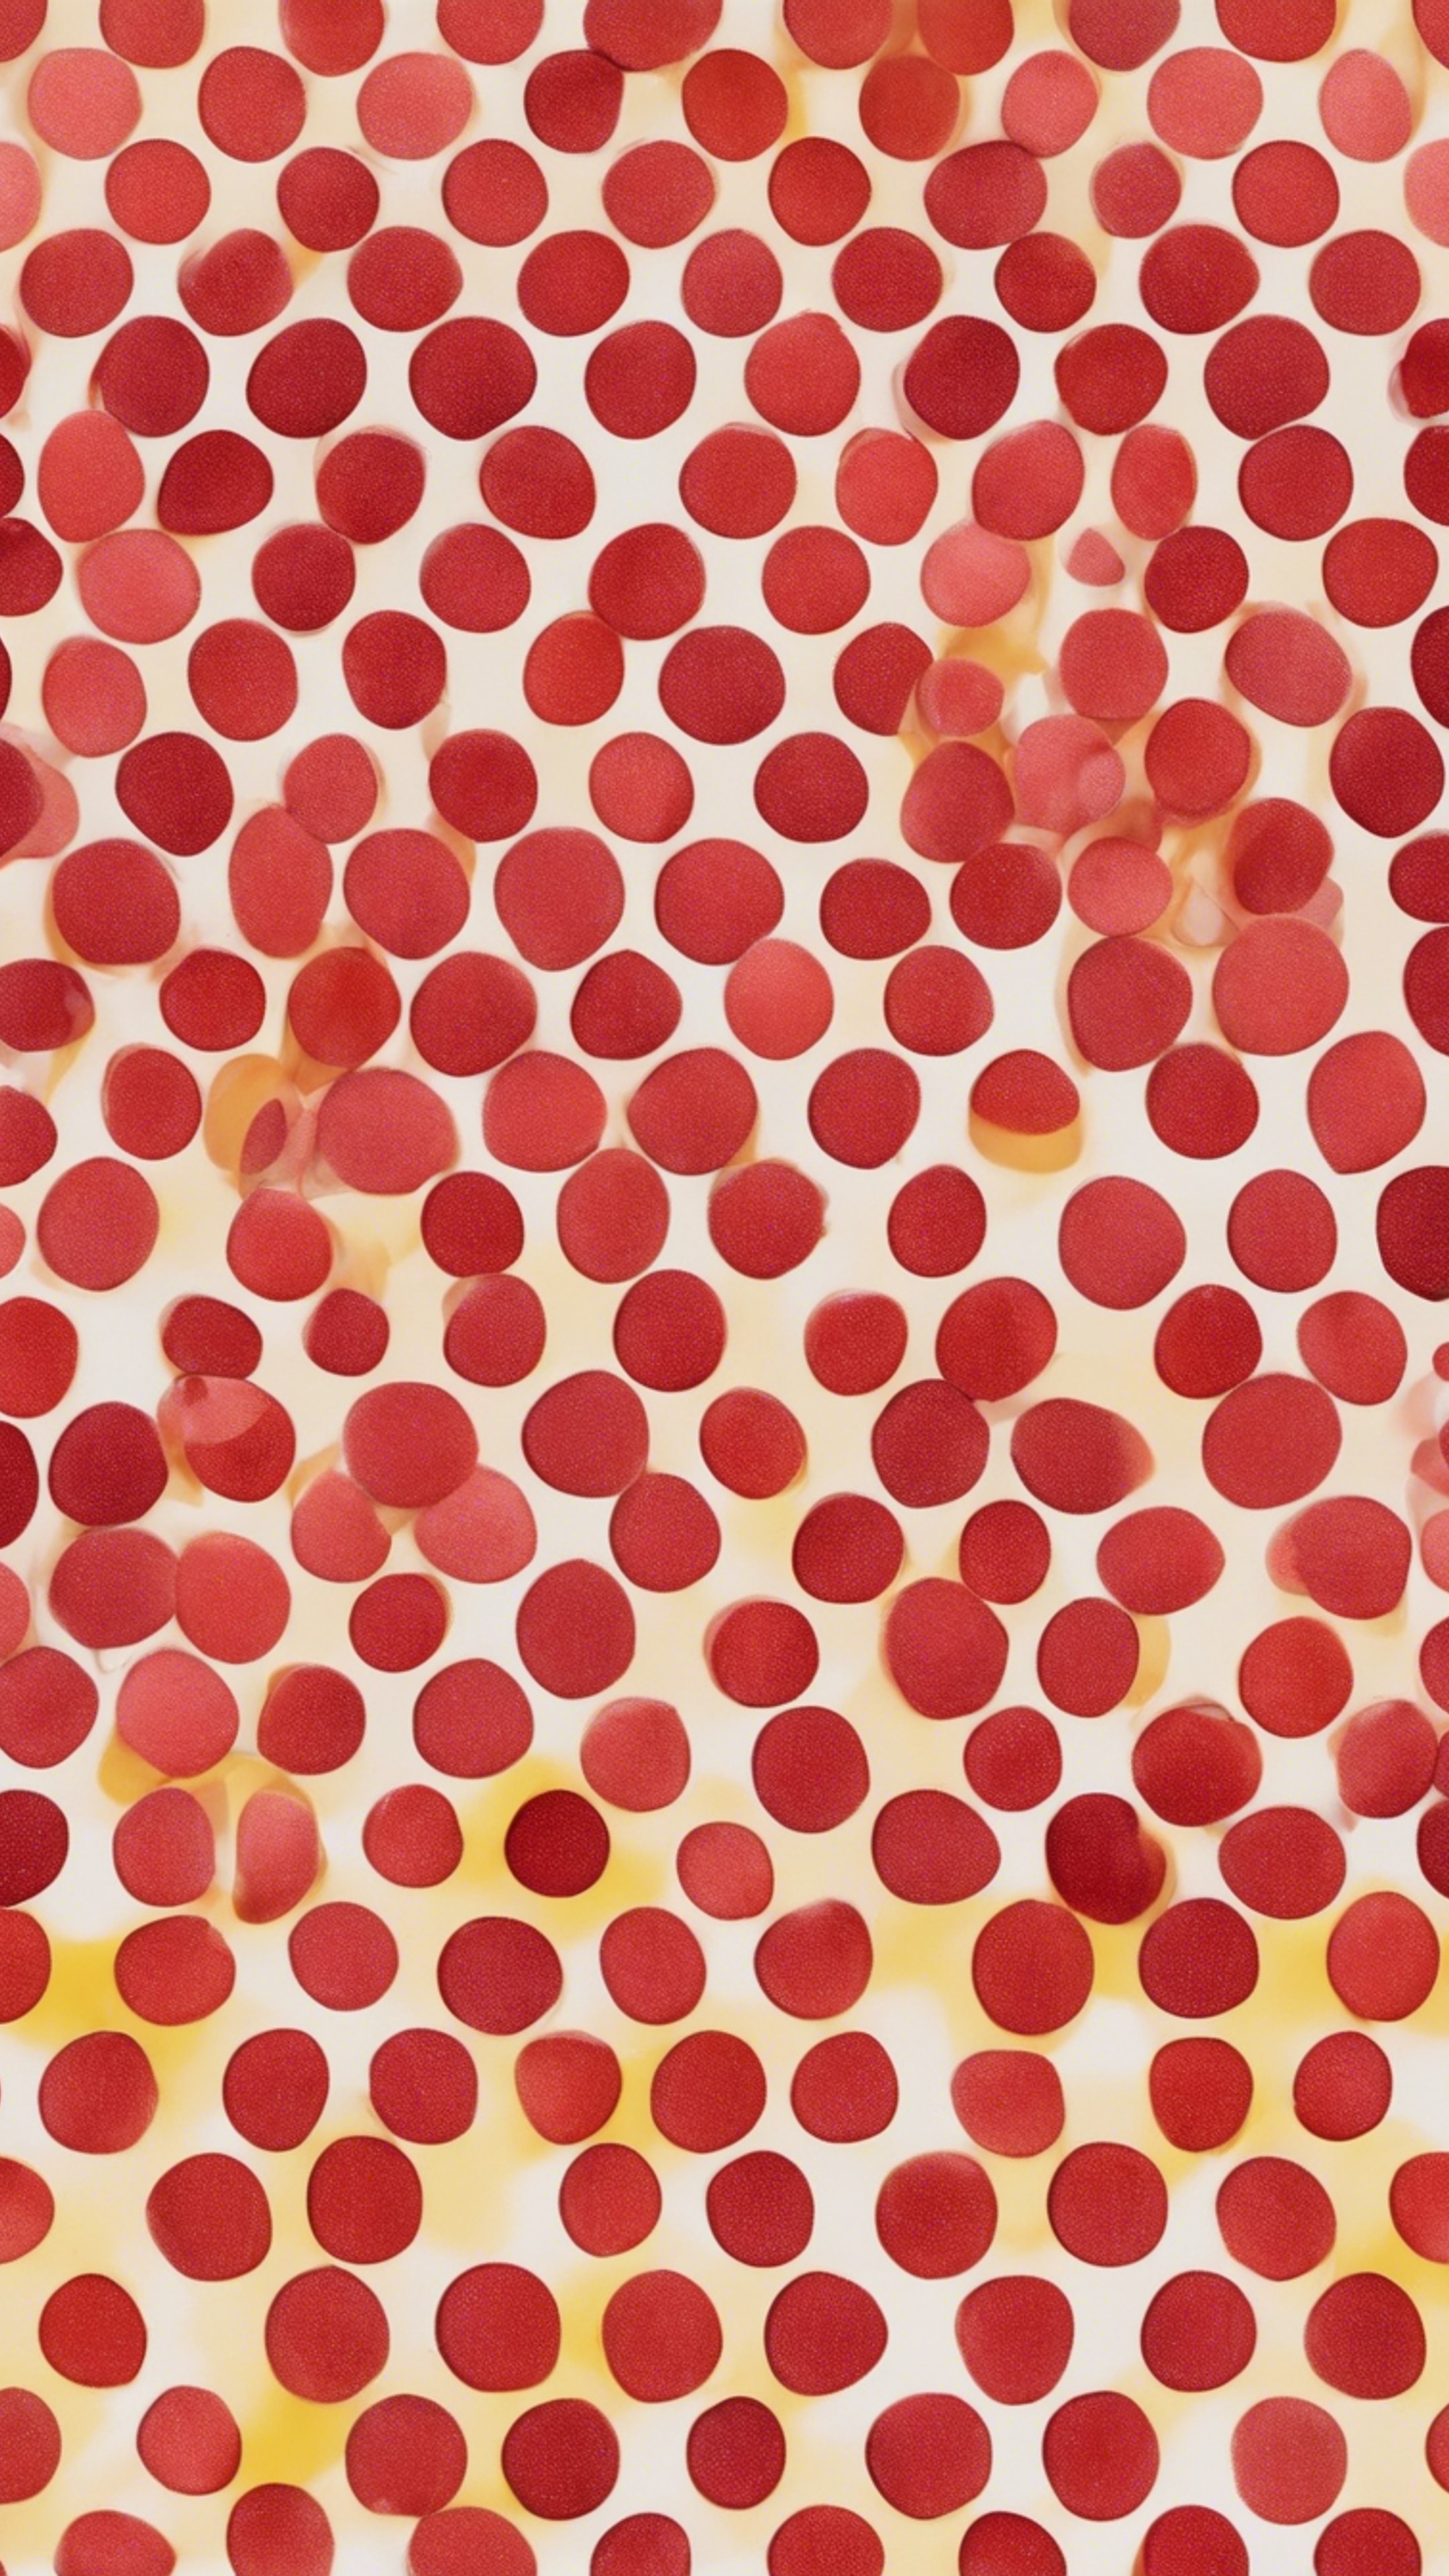 Red polka dots clashing beautifully with yellow ones, all over the seamless canvas. Taustakuva[6845ea3f5aaf42daa07d]